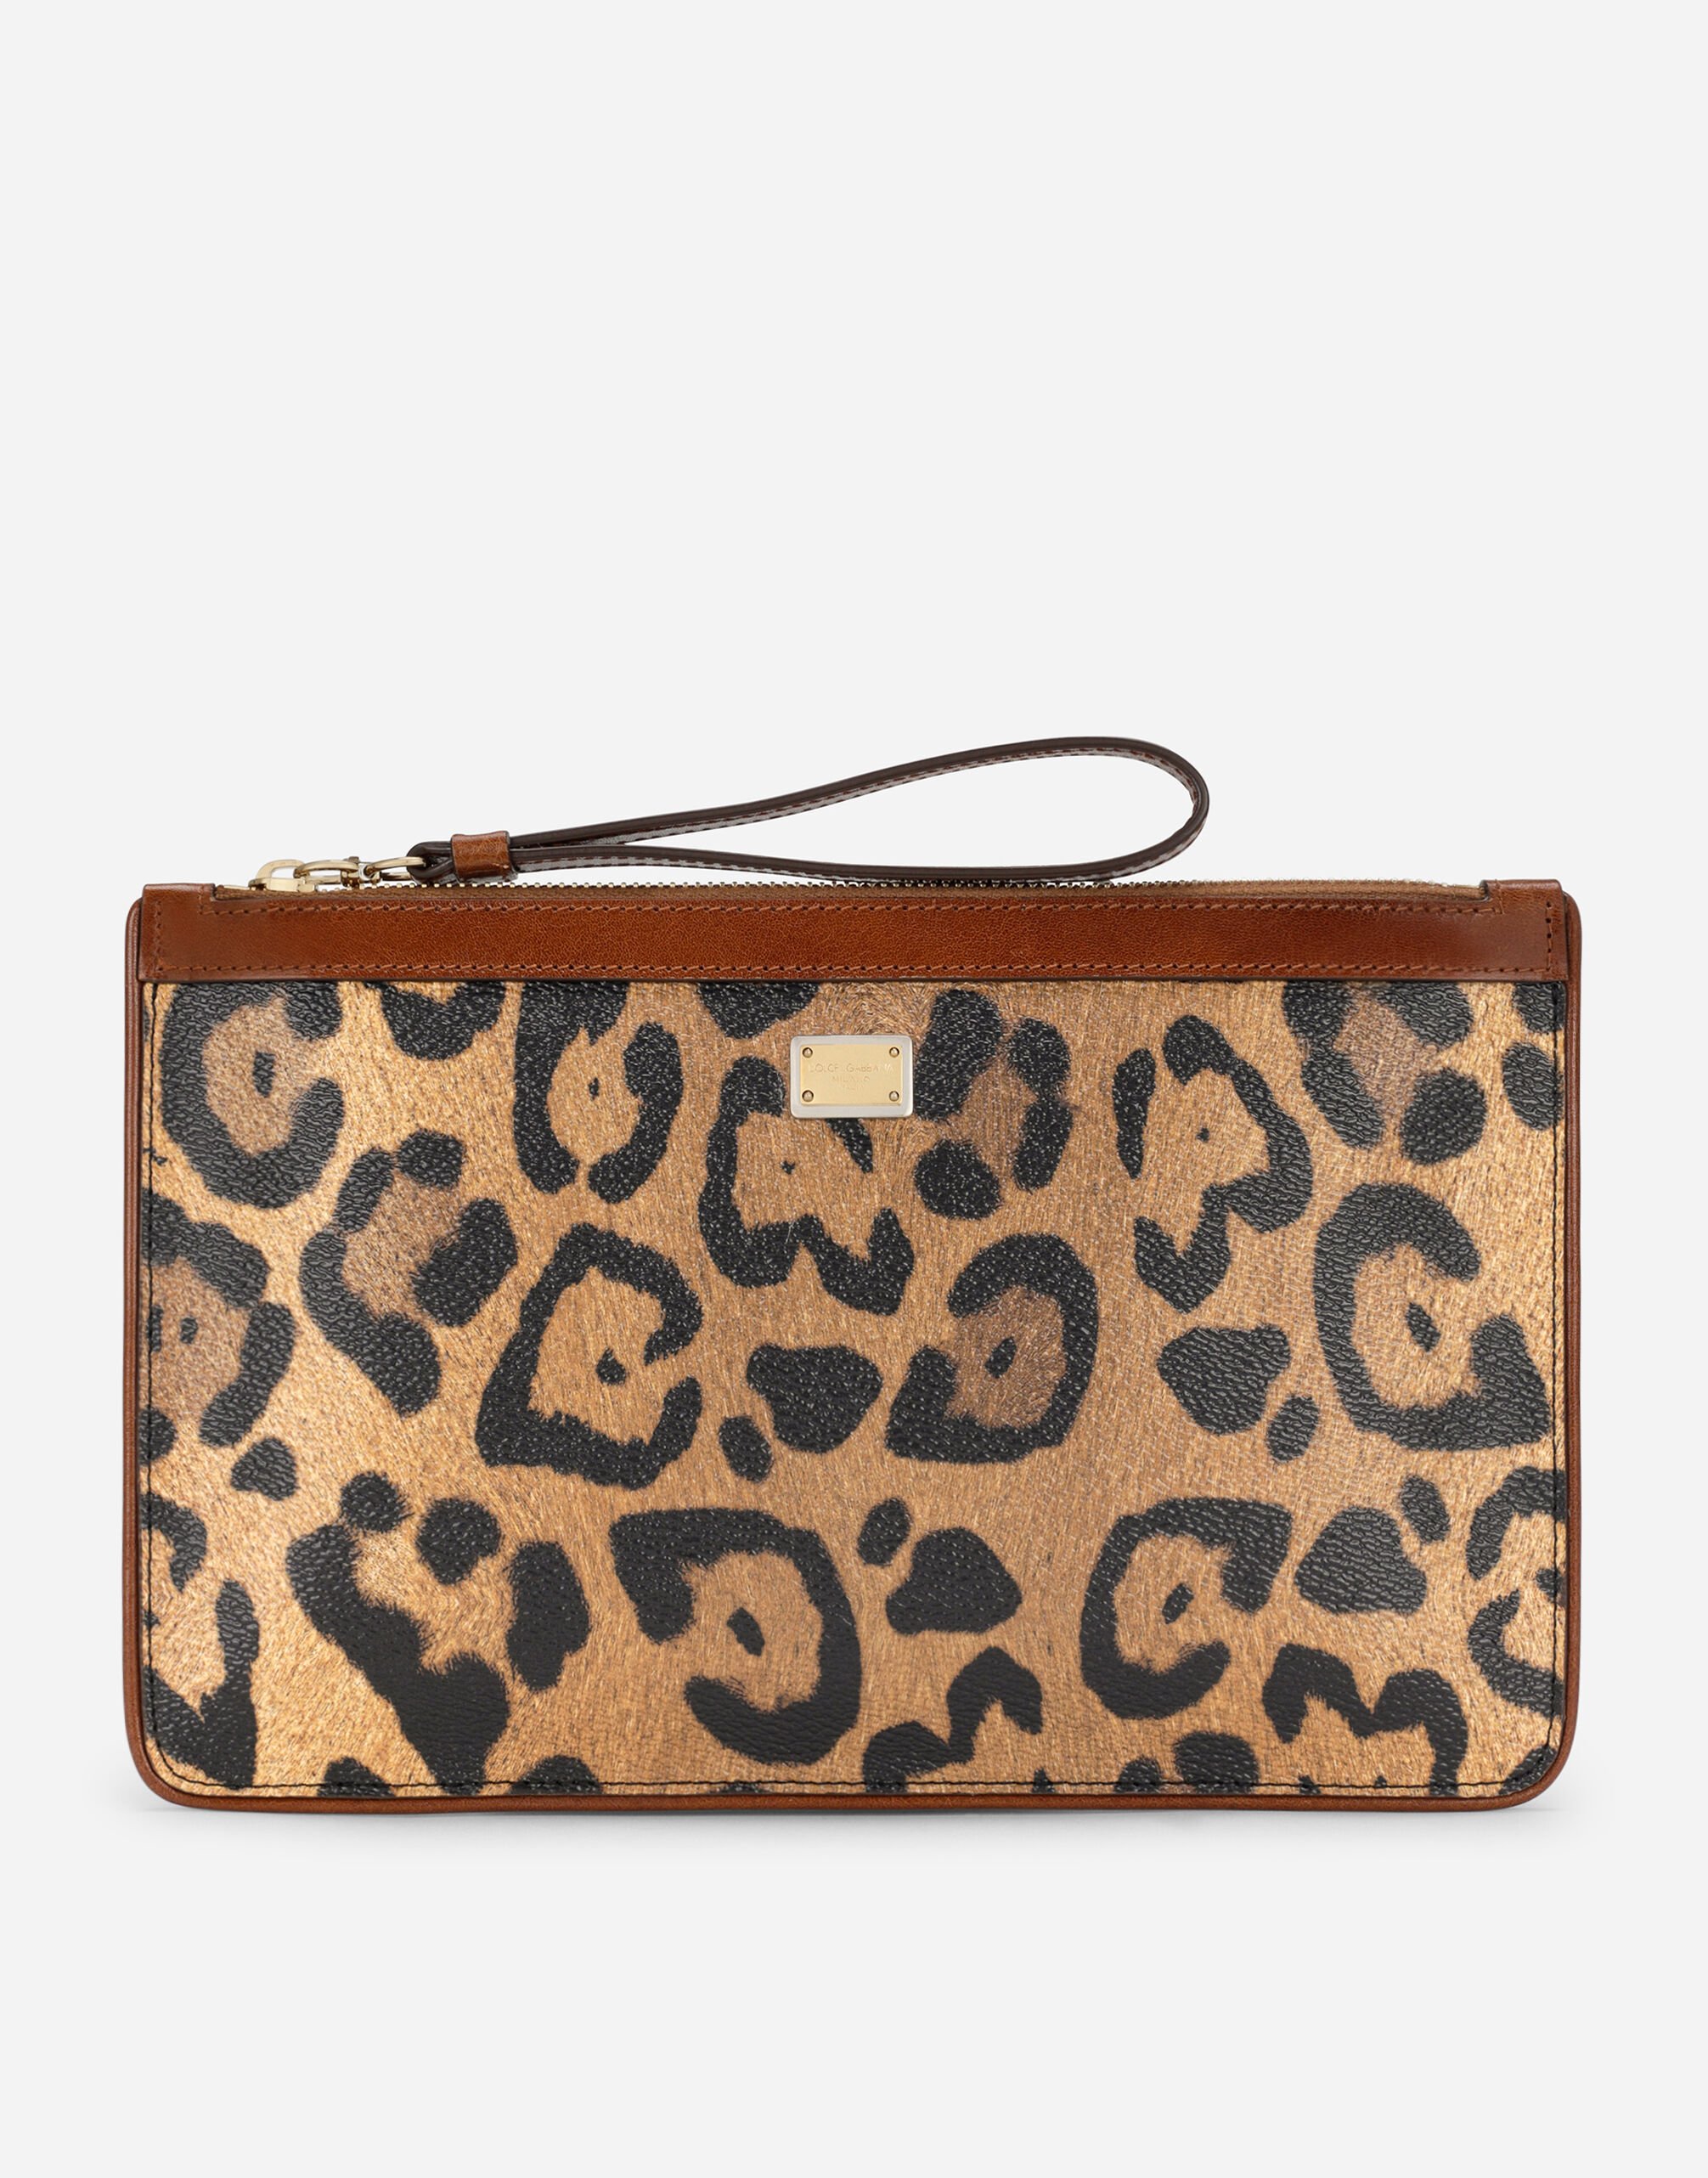 Dolce & Gabbana Flat toiletry bag in leopard-print Crespo with branded plate Multicolor BB7609AU648